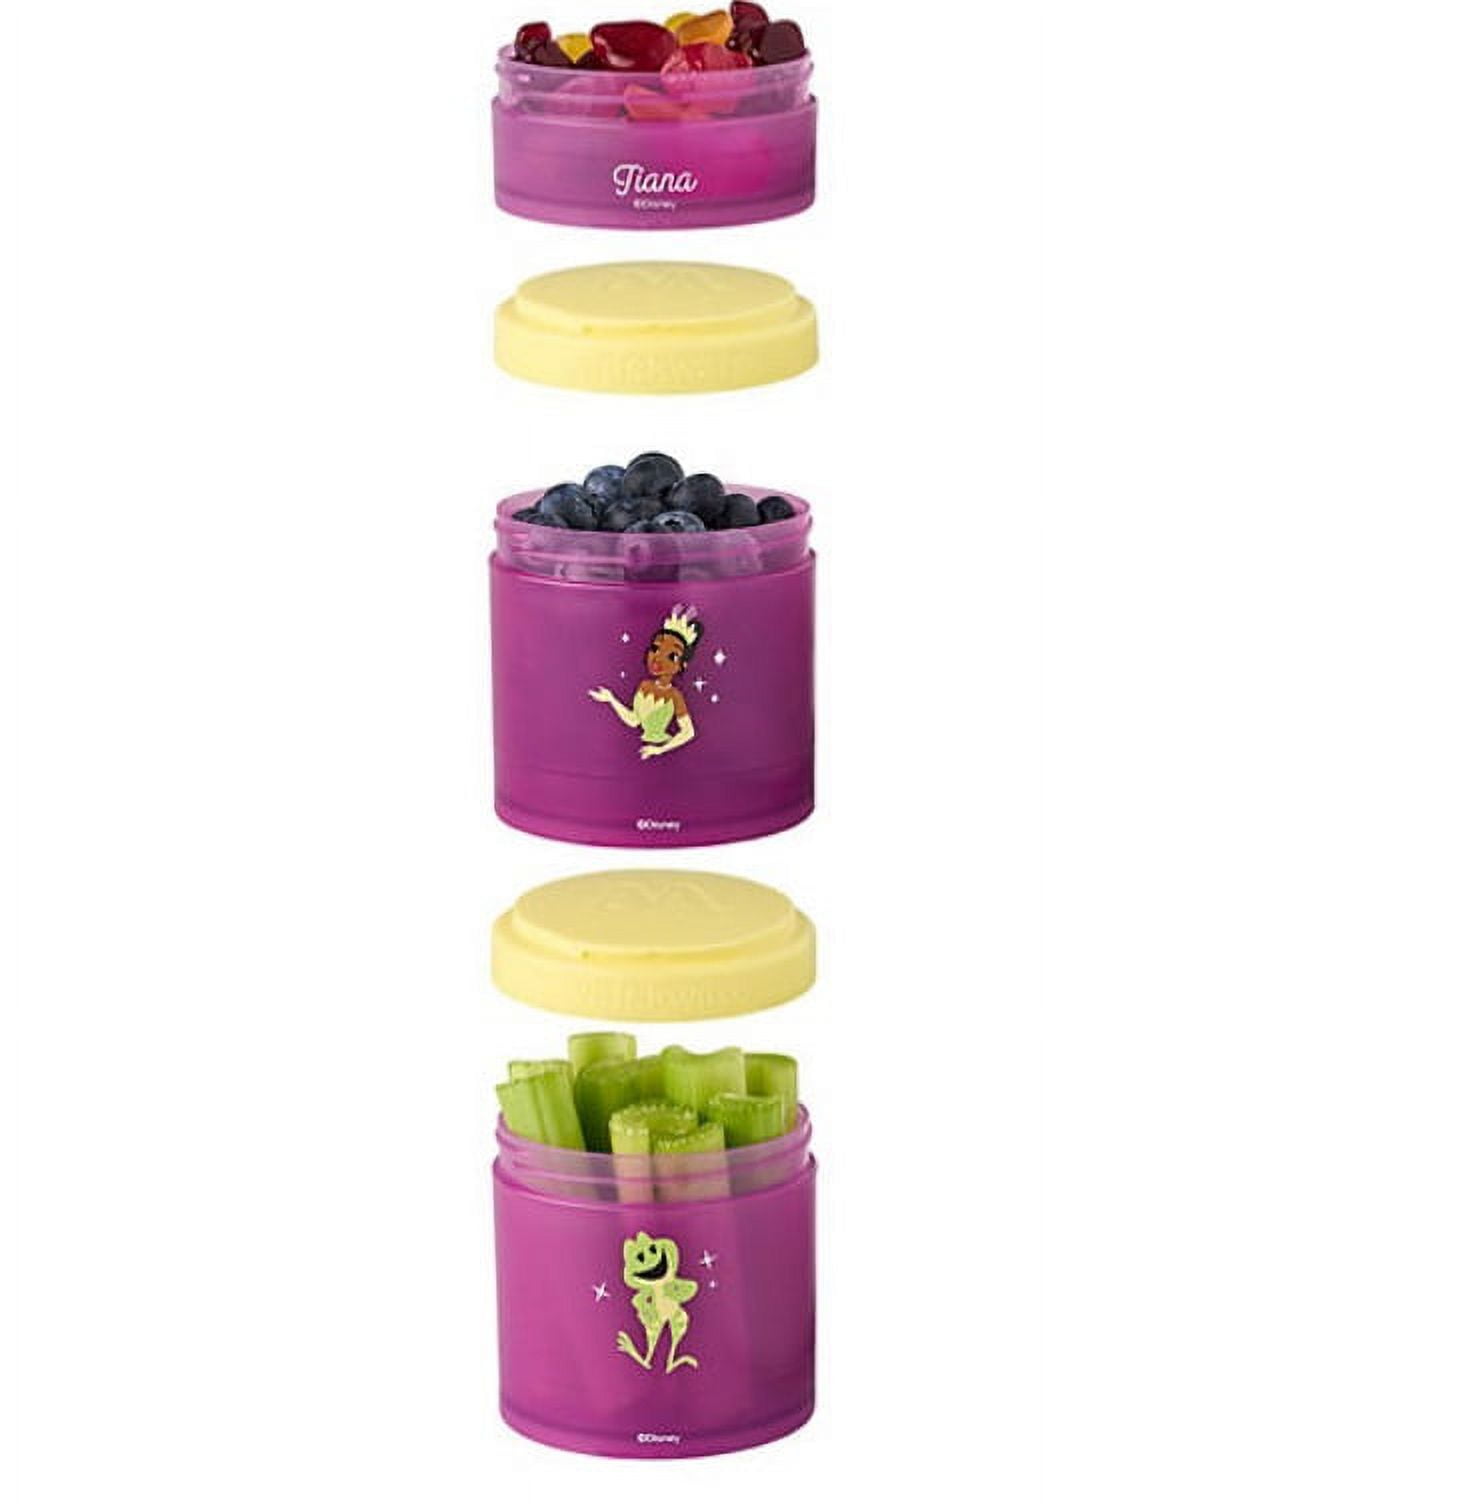 Whiskware Disney Princess Stackable Snack Containers for Kids and Toddlers,  3 Stackable Snack Cups for School and Travel, Tiana